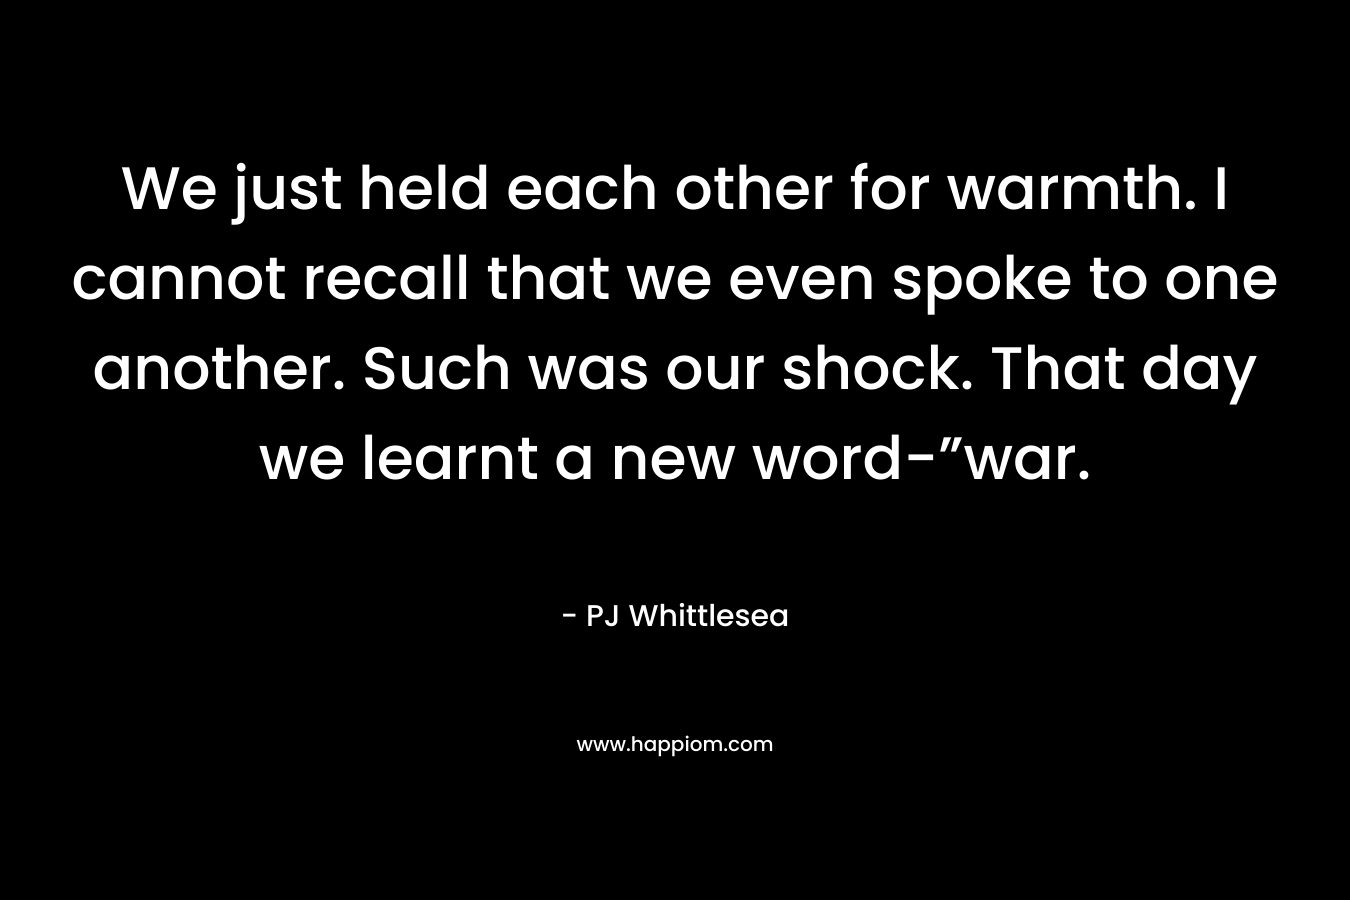 We just held each other for warmth. I cannot recall that we even spoke to one another. Such was our shock. That day we learnt a new word-”war. – PJ Whittlesea